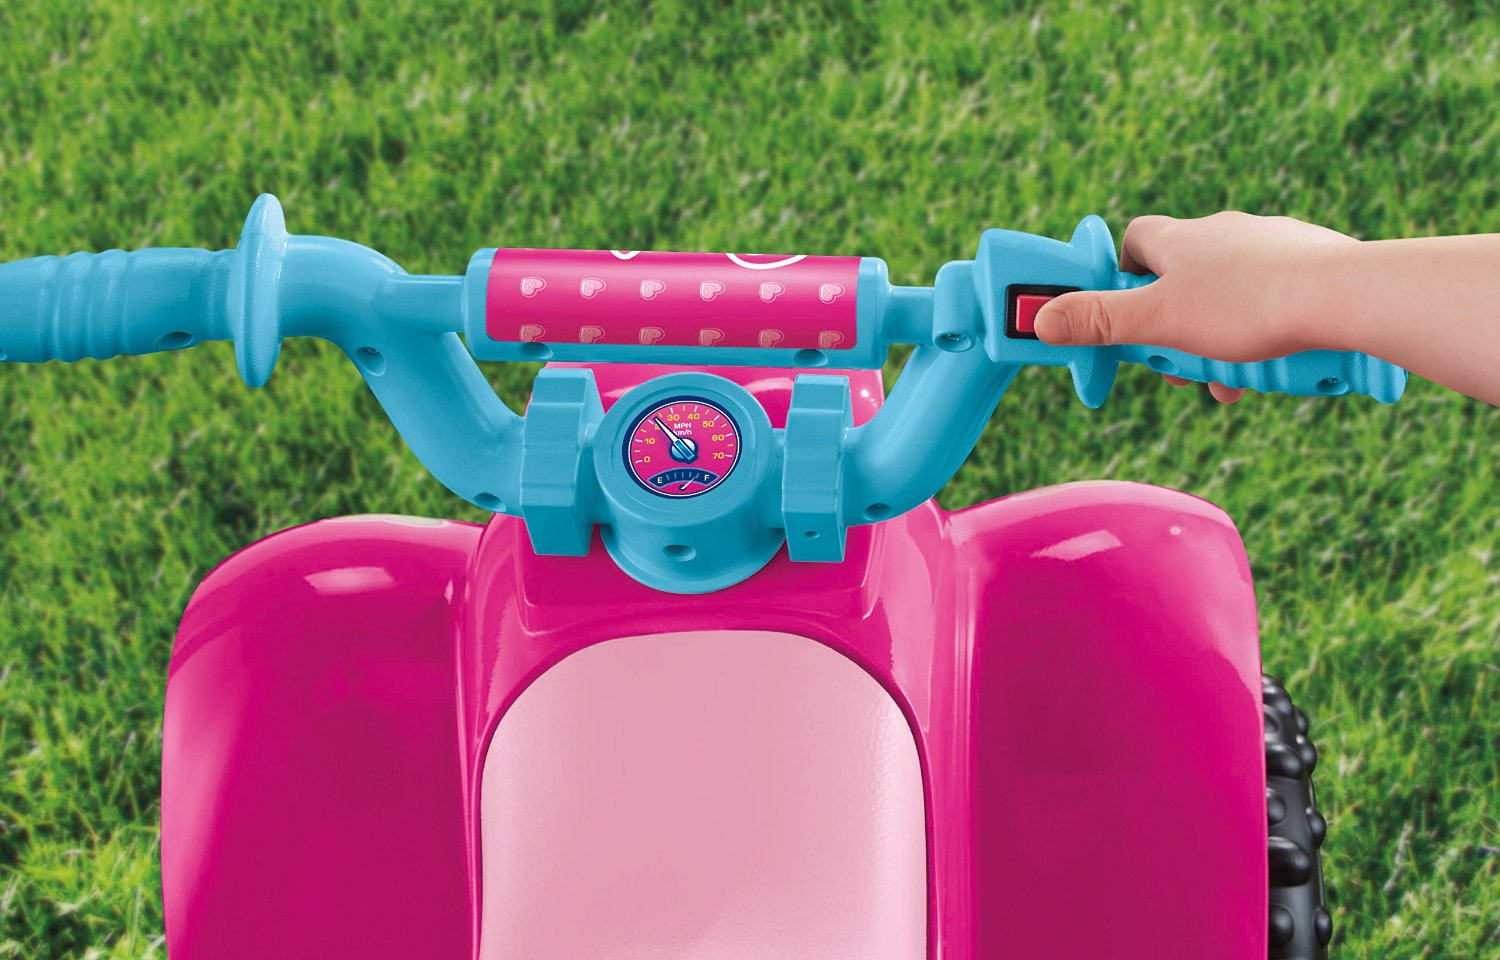 The 16 Best Toys For 3-Year-Old Girls In 2021